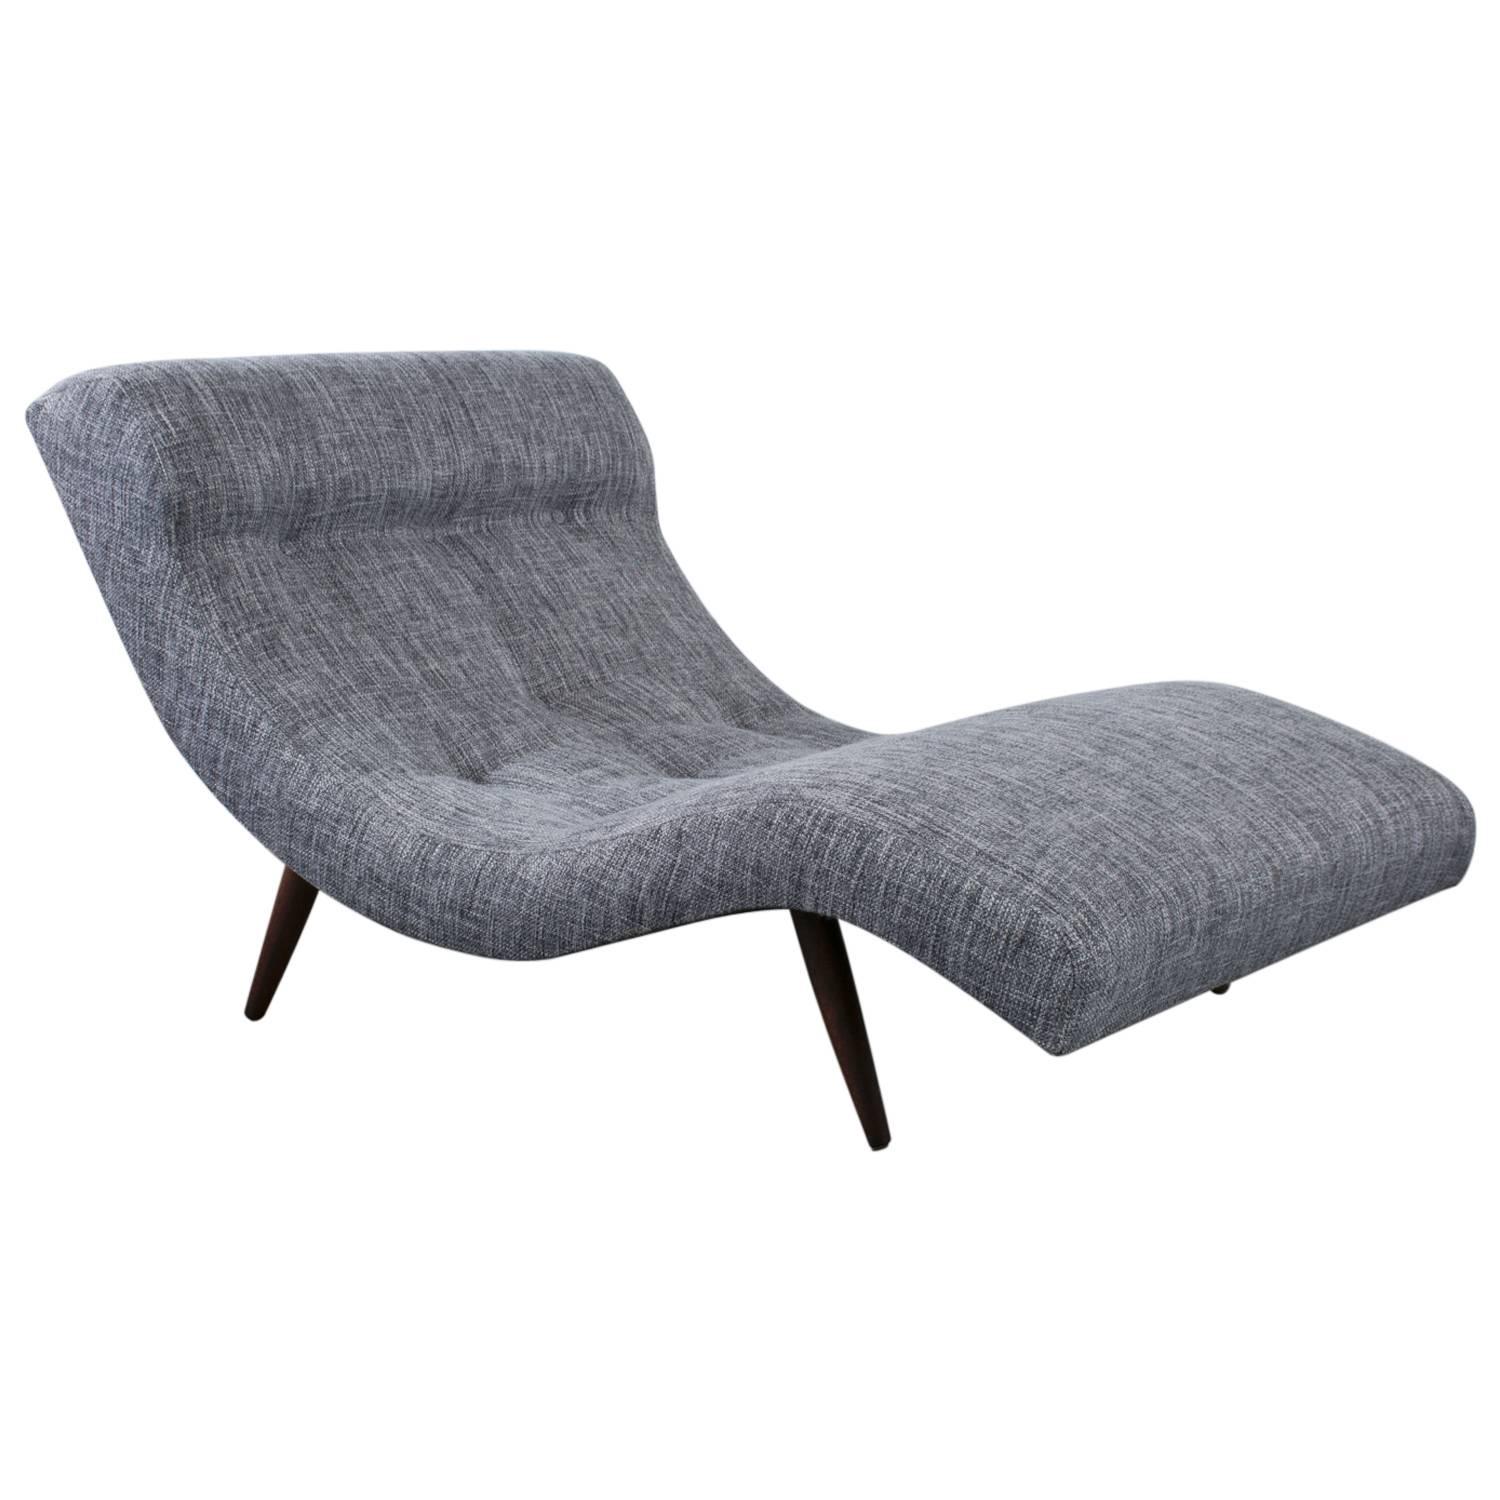 Vintage Mid-Century Grey Chaise Longue by Adrian Pearsall for Craft Associates